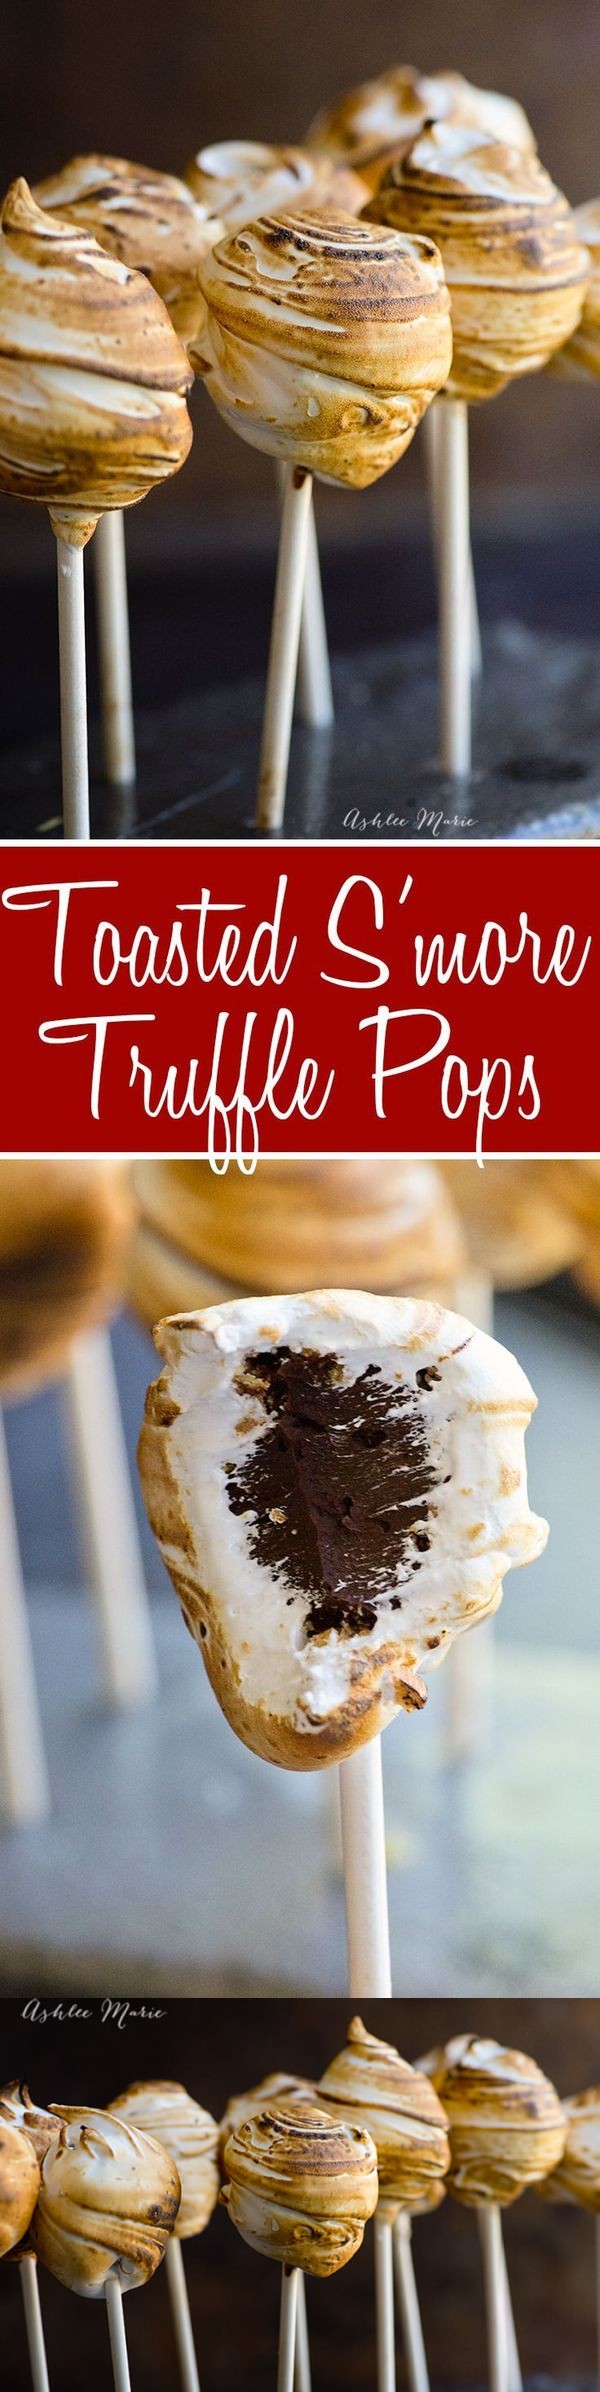 Toasted S'more Truffle Pops - recipe and video